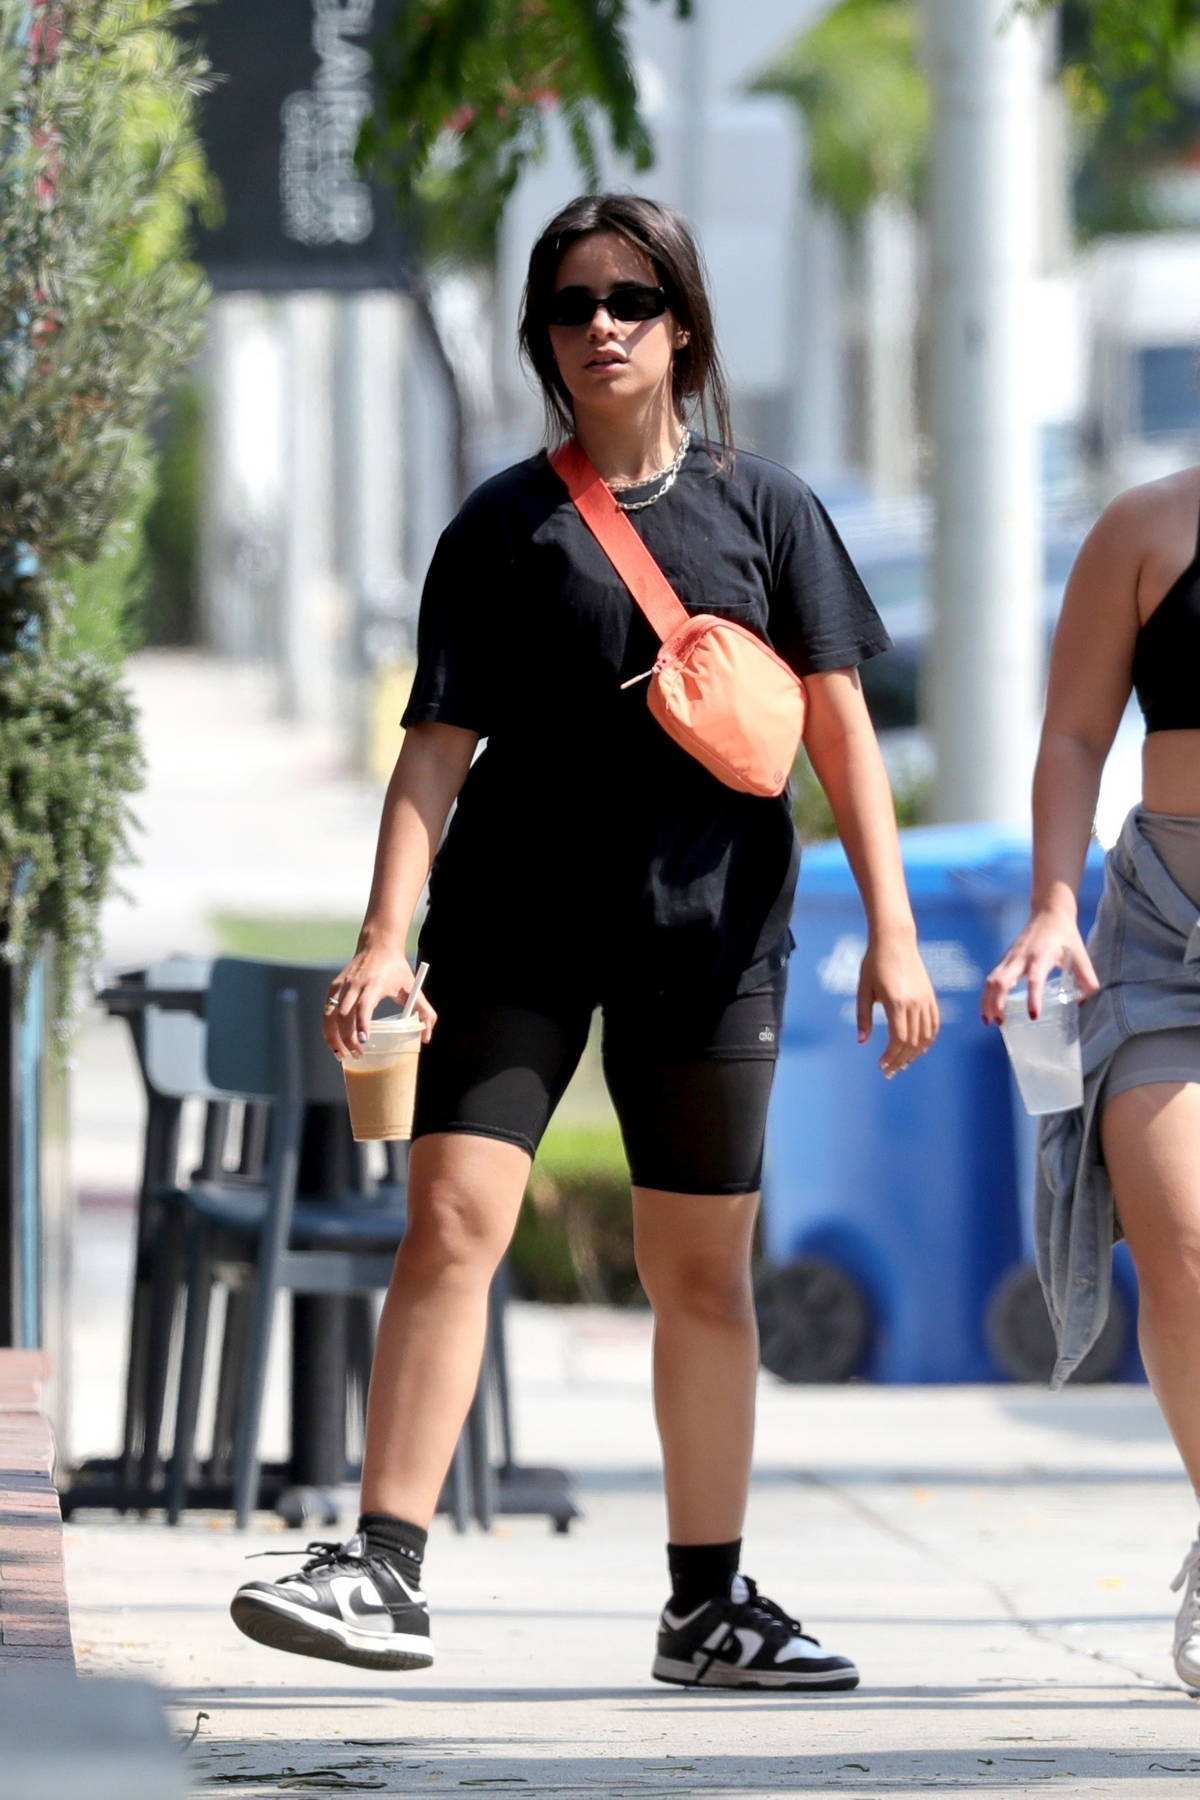 https://www.celebsfirst.com/wp-content/uploads/2021/08/camila-cabello-steps-out-for-coffee-wearing-a-black-t-shirt-and-legging-shorts-in-west-hollywood-california-190821_7.jpg